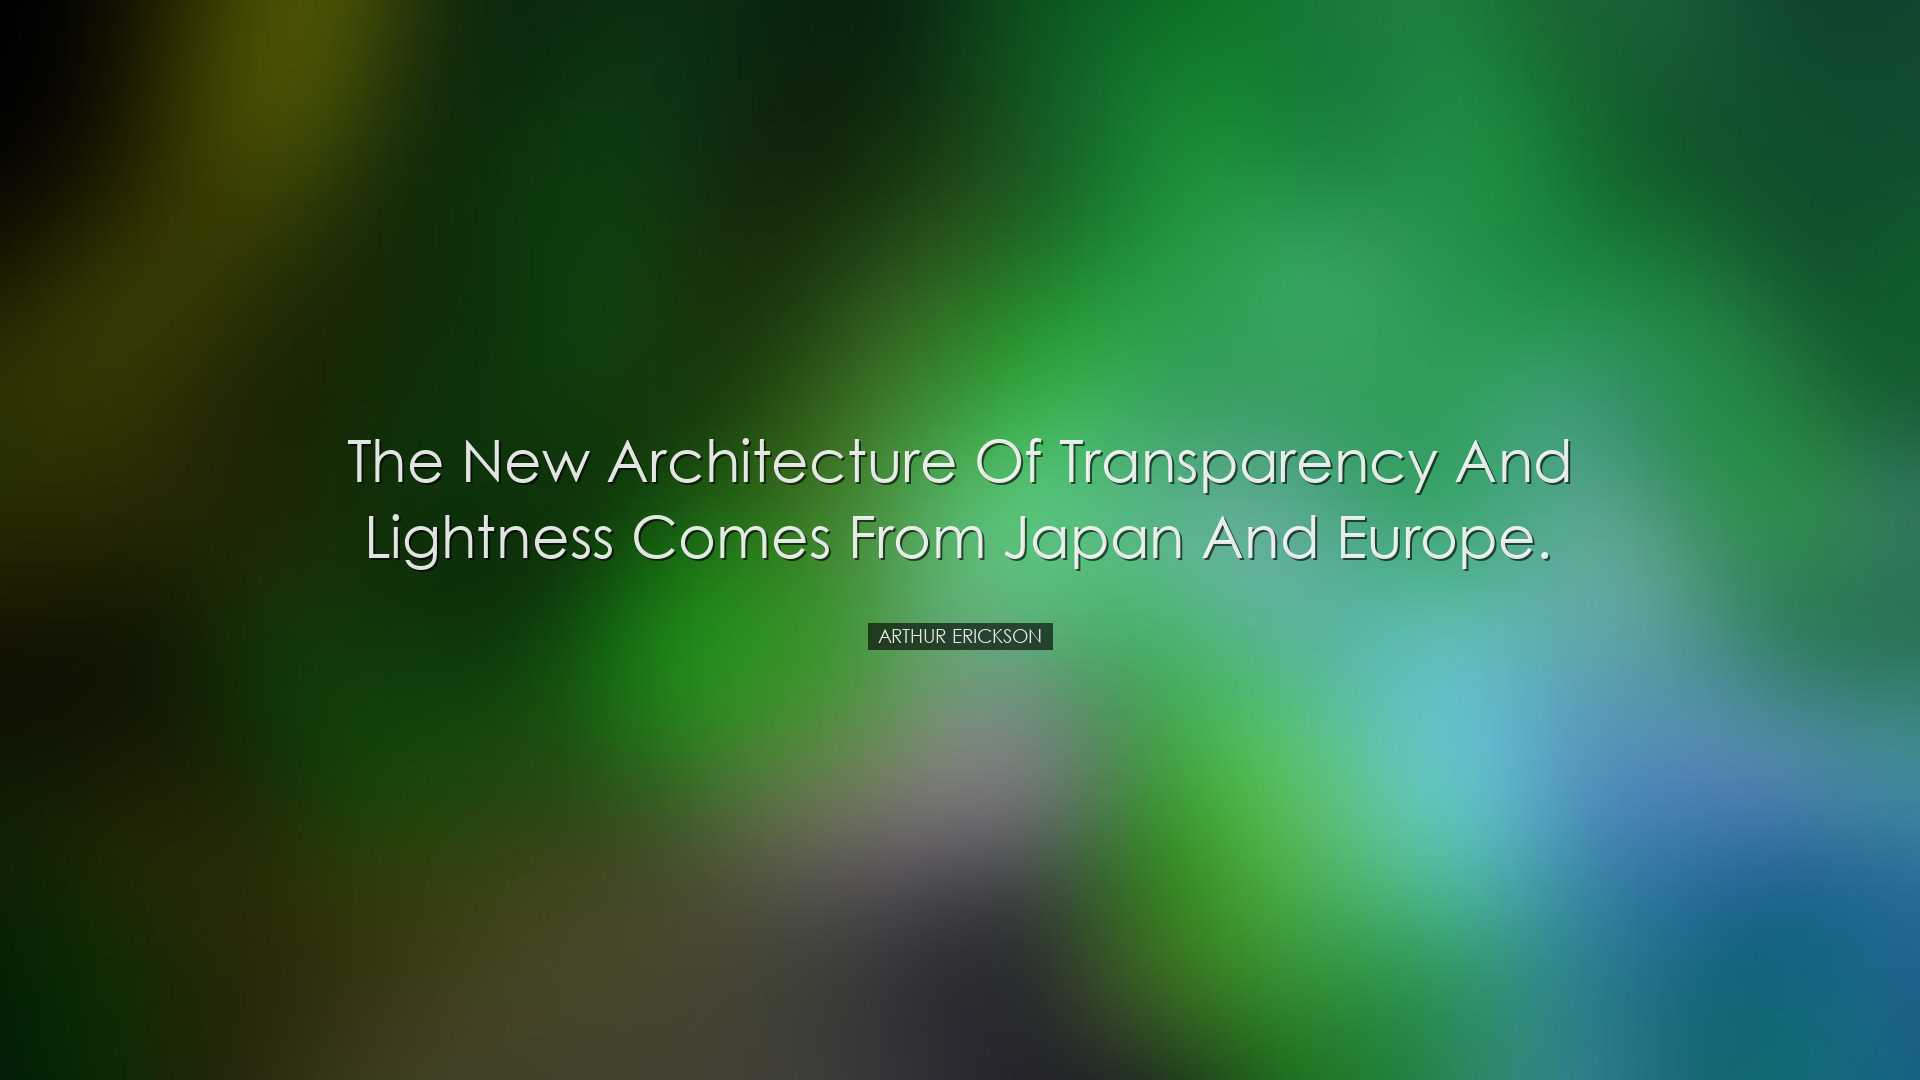 The new architecture of transparency and lightness comes from Japa